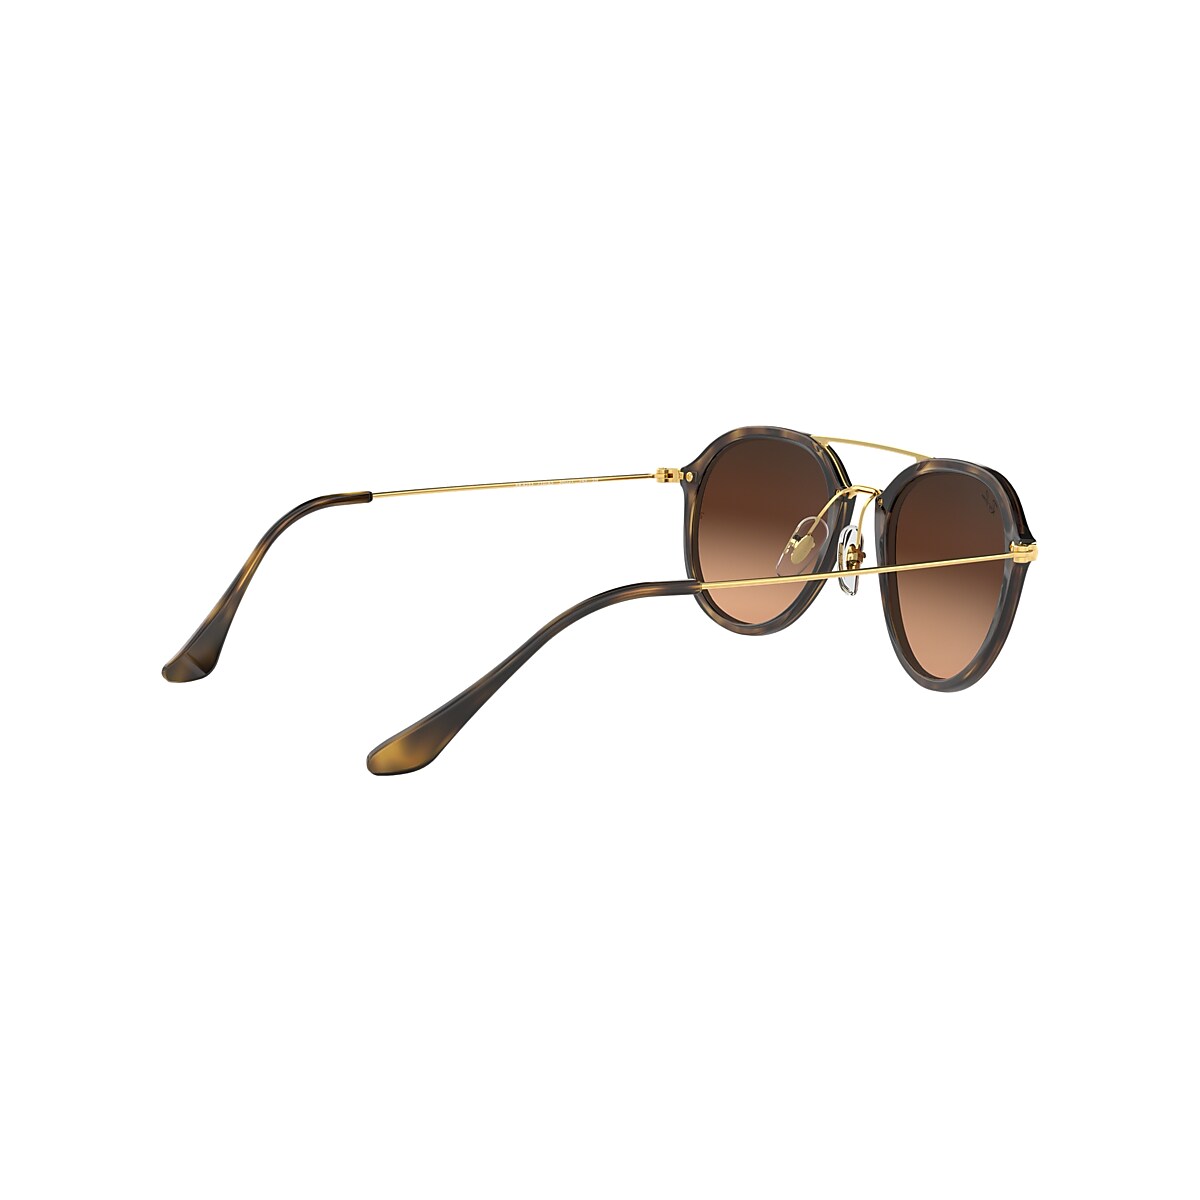 RB4253 Sunglasses in Light Havana and Pink/Brown - RB4253 | Ray 